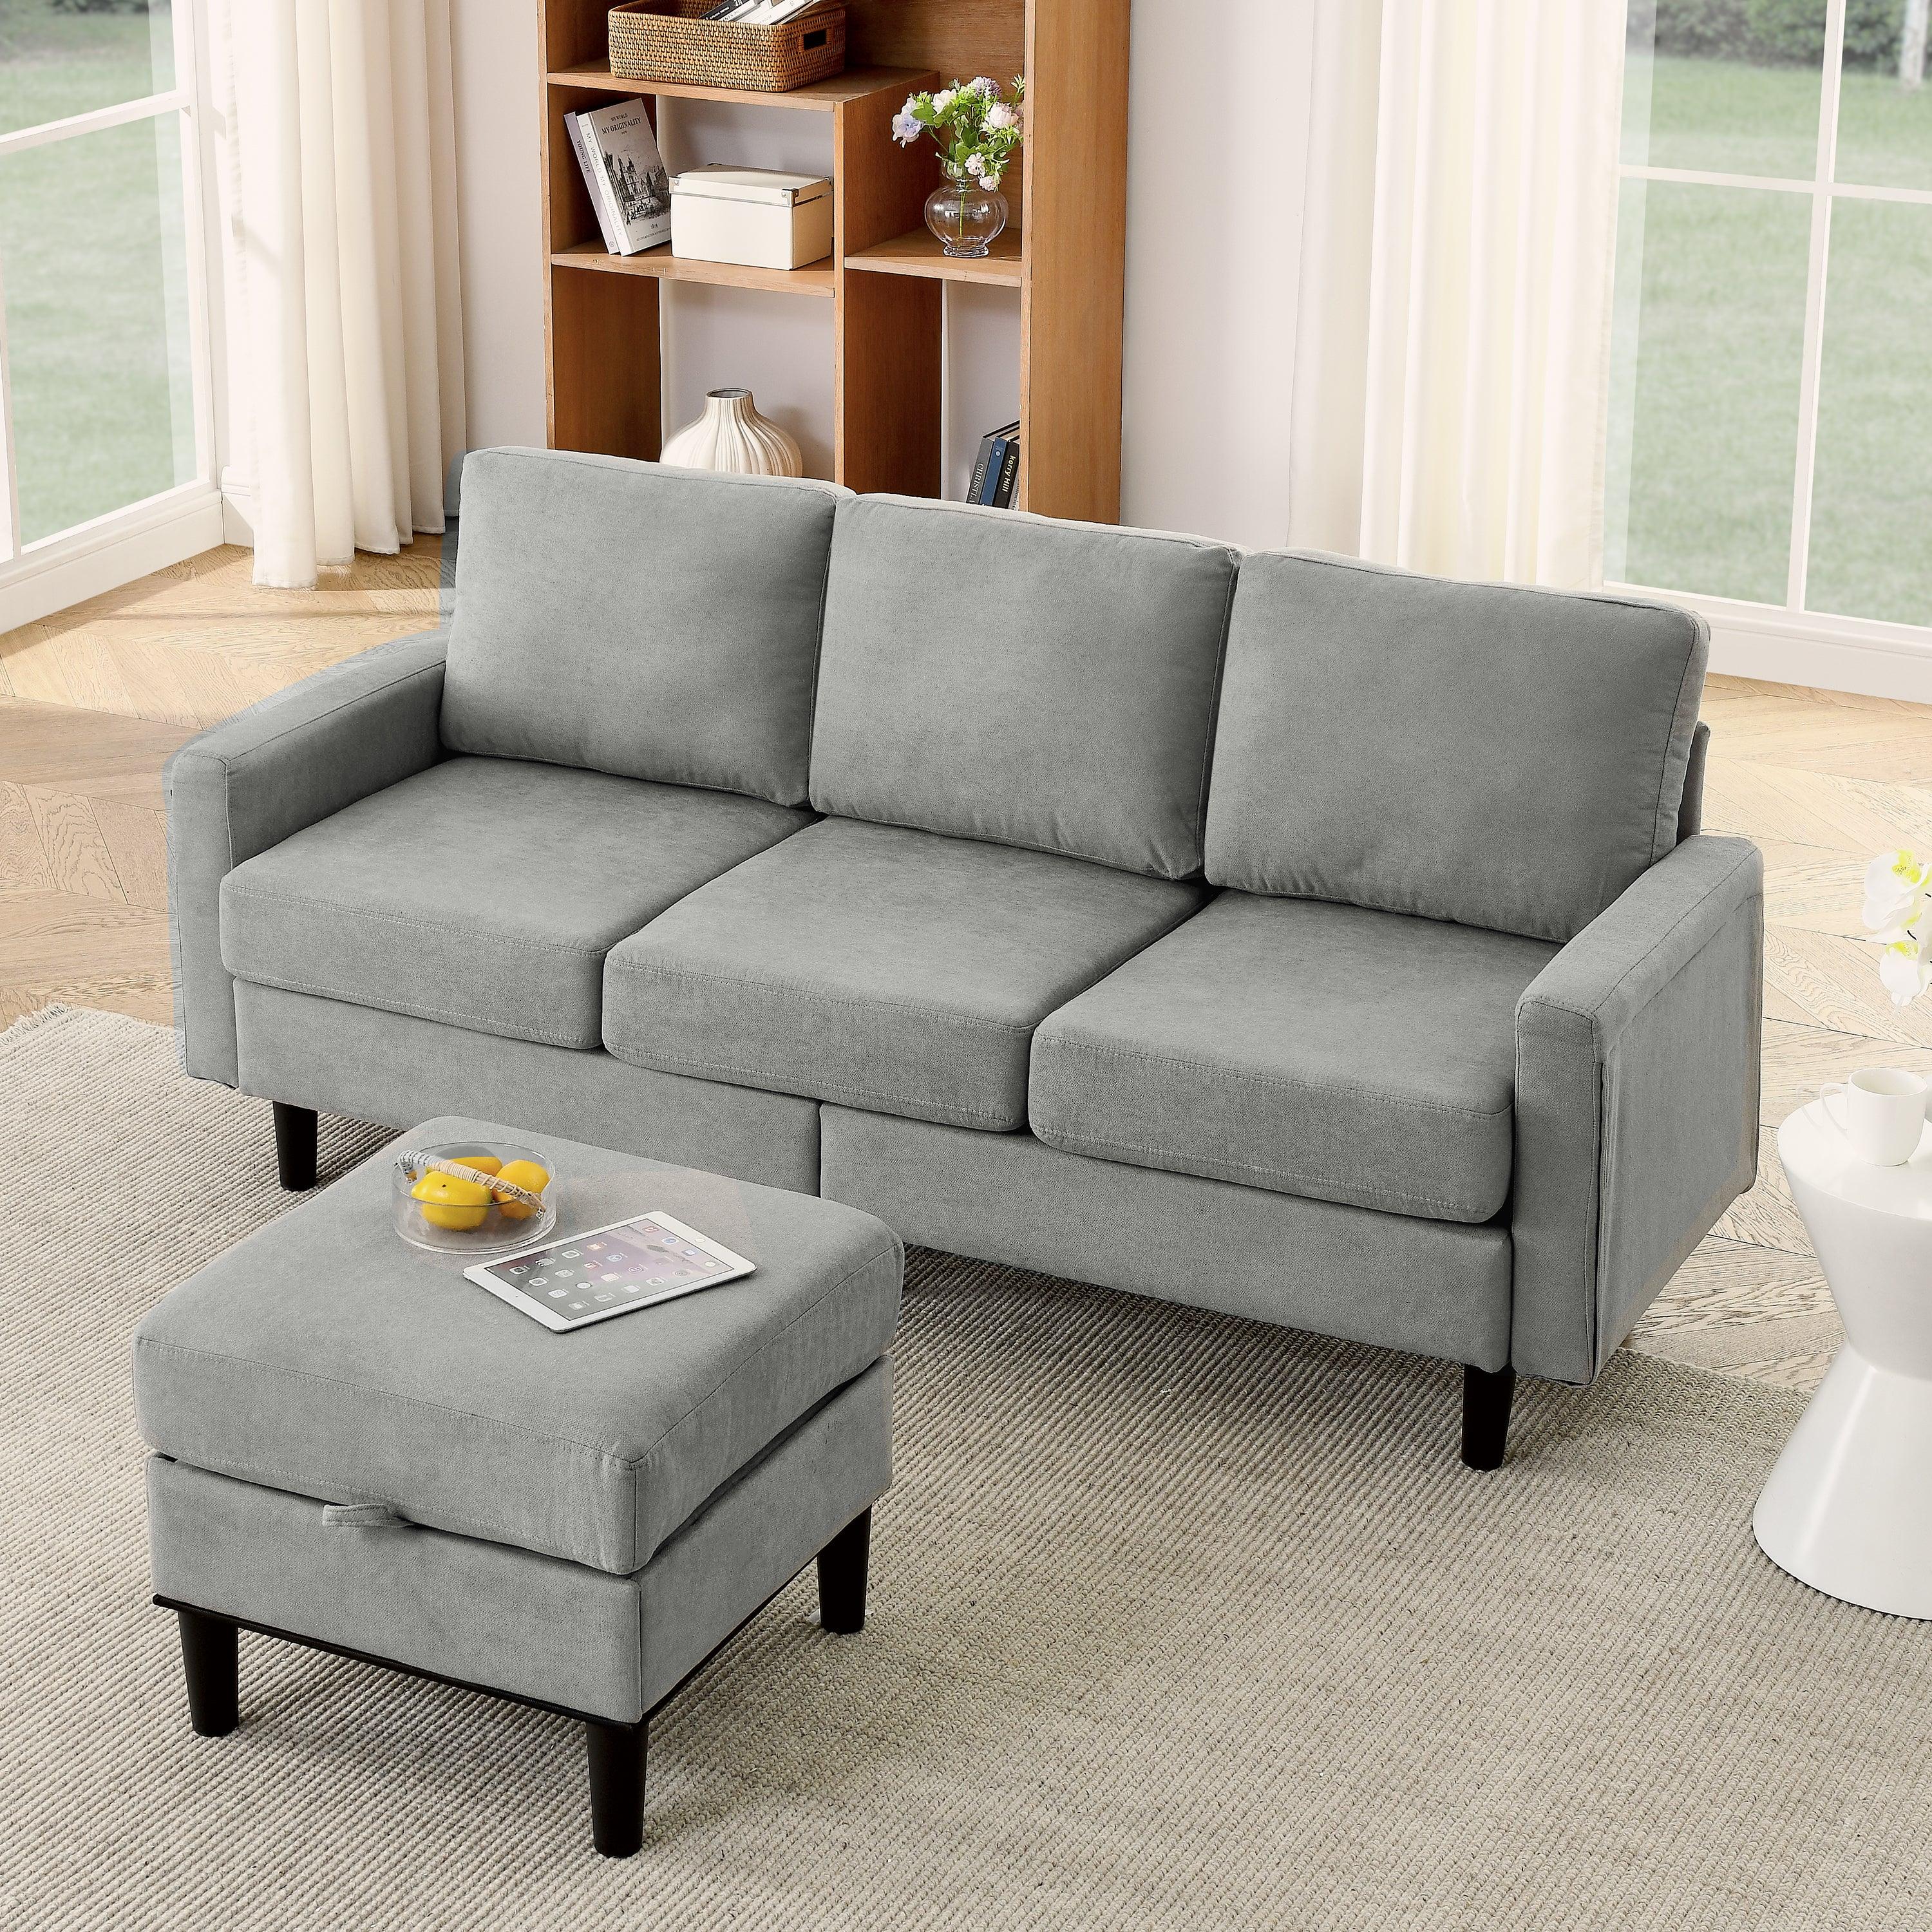 🆓🚛 Upholstered Sectional Sofa Couch, L Shaped Couch With Storage Reversible Ottoman Bench 3 Seater for Living Room, Apartment, Compact Spaces, Fabric Light Gray